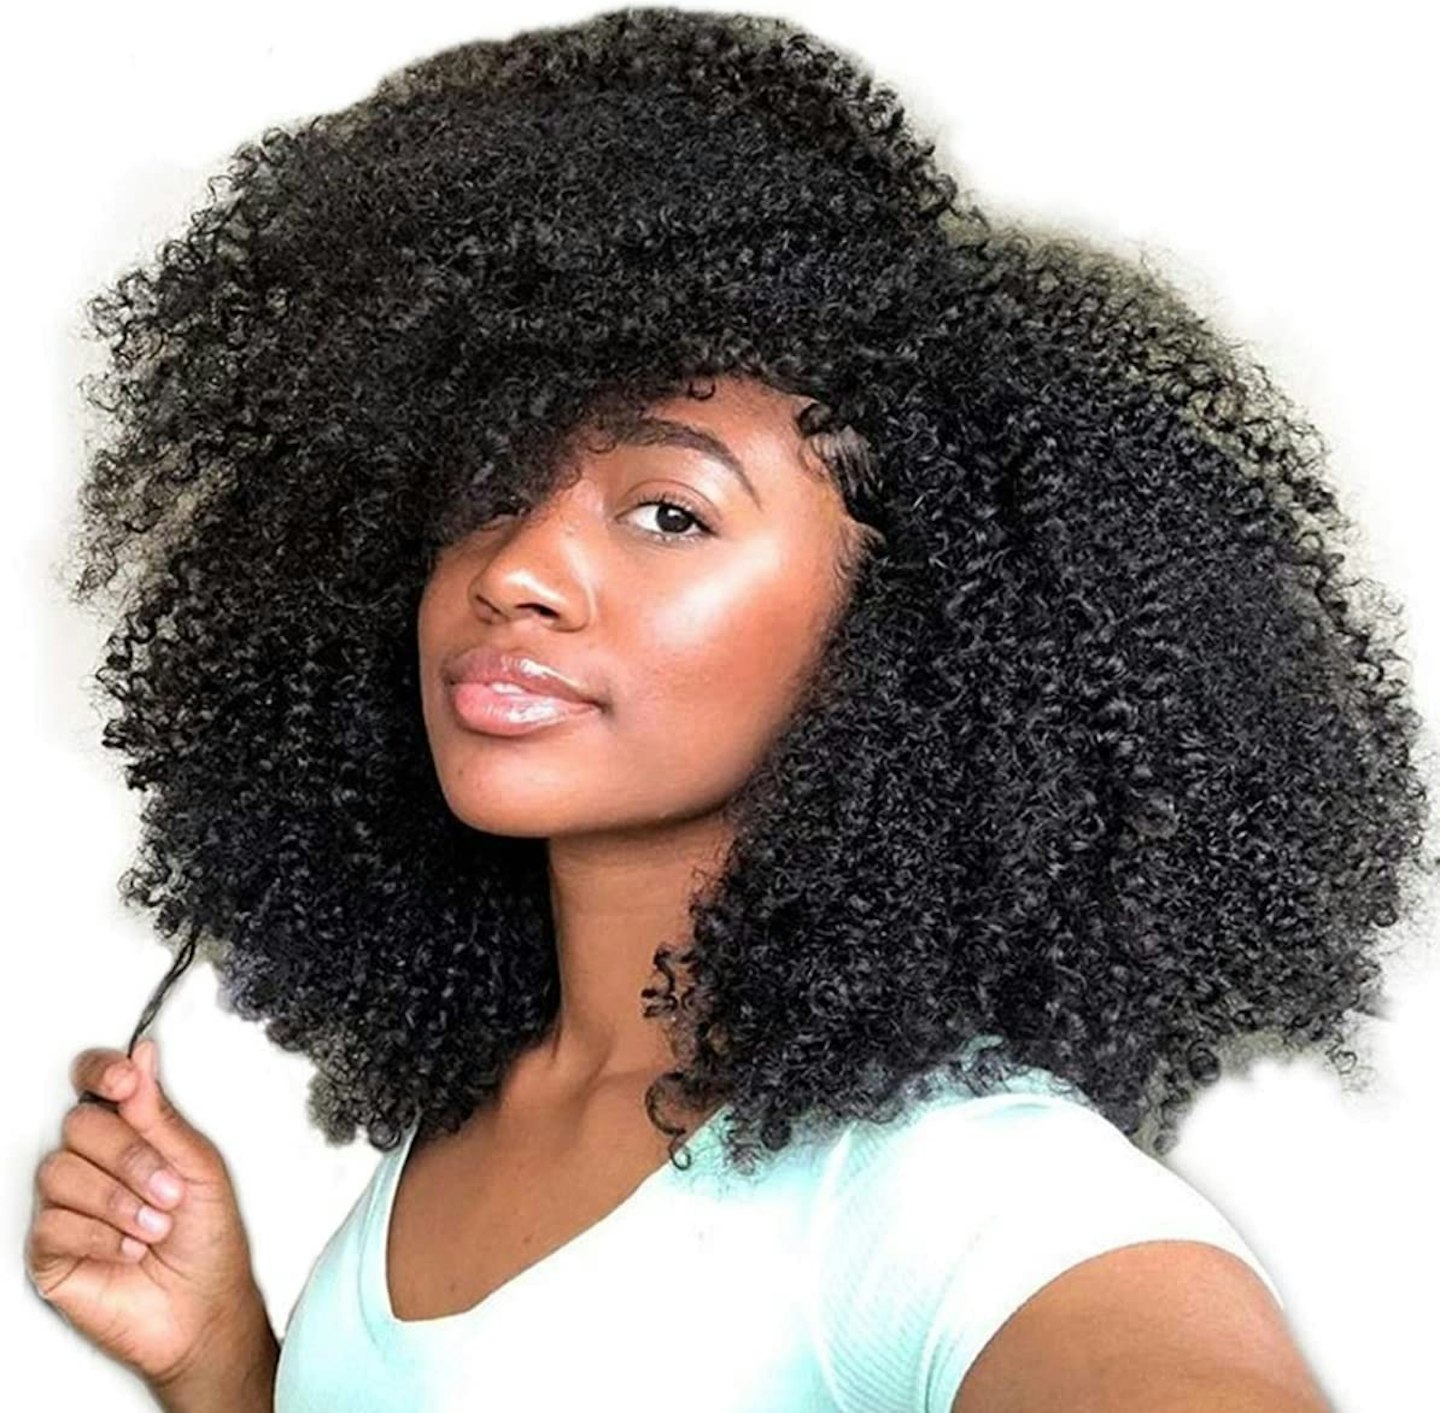 B 4C Afro Kinky Curly Clip in Hair Extensions 16 Inches